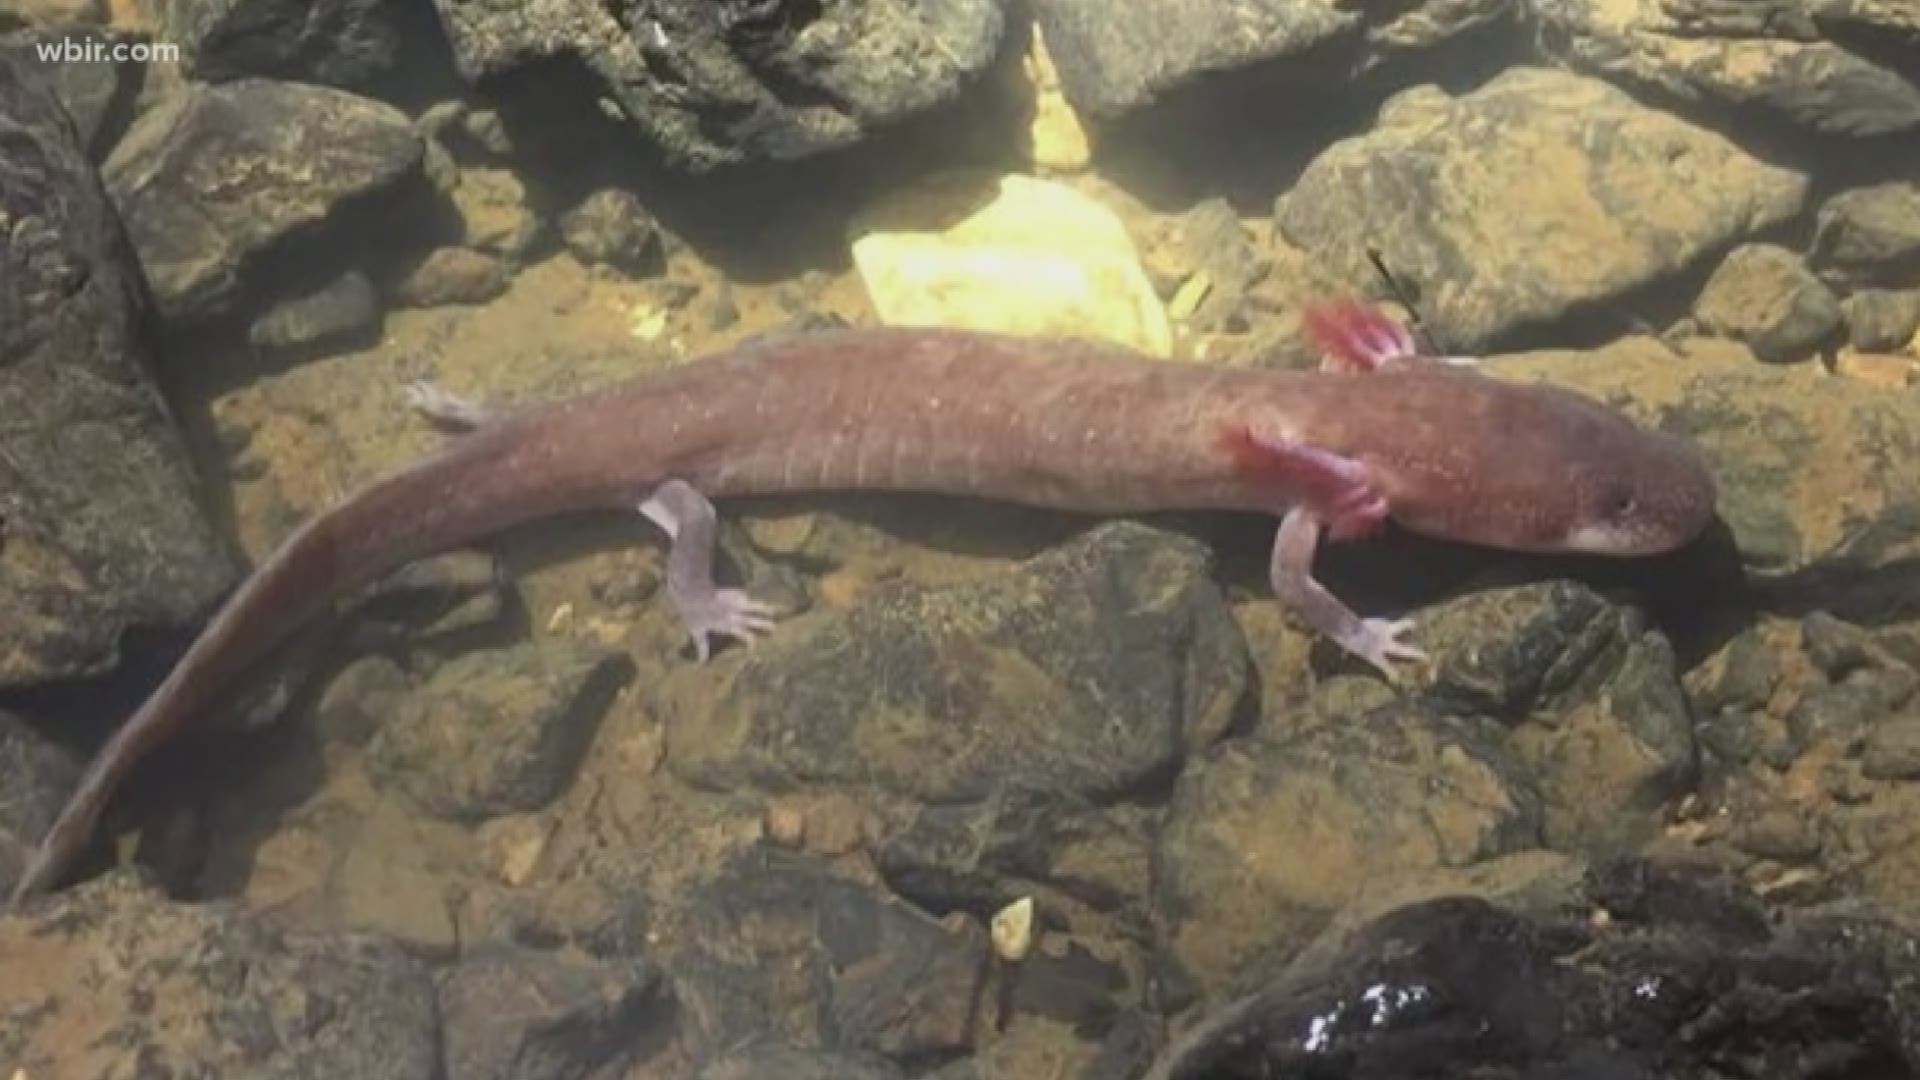 Researchers at the University of Tennessee discovered the largest individual salamander in North America.